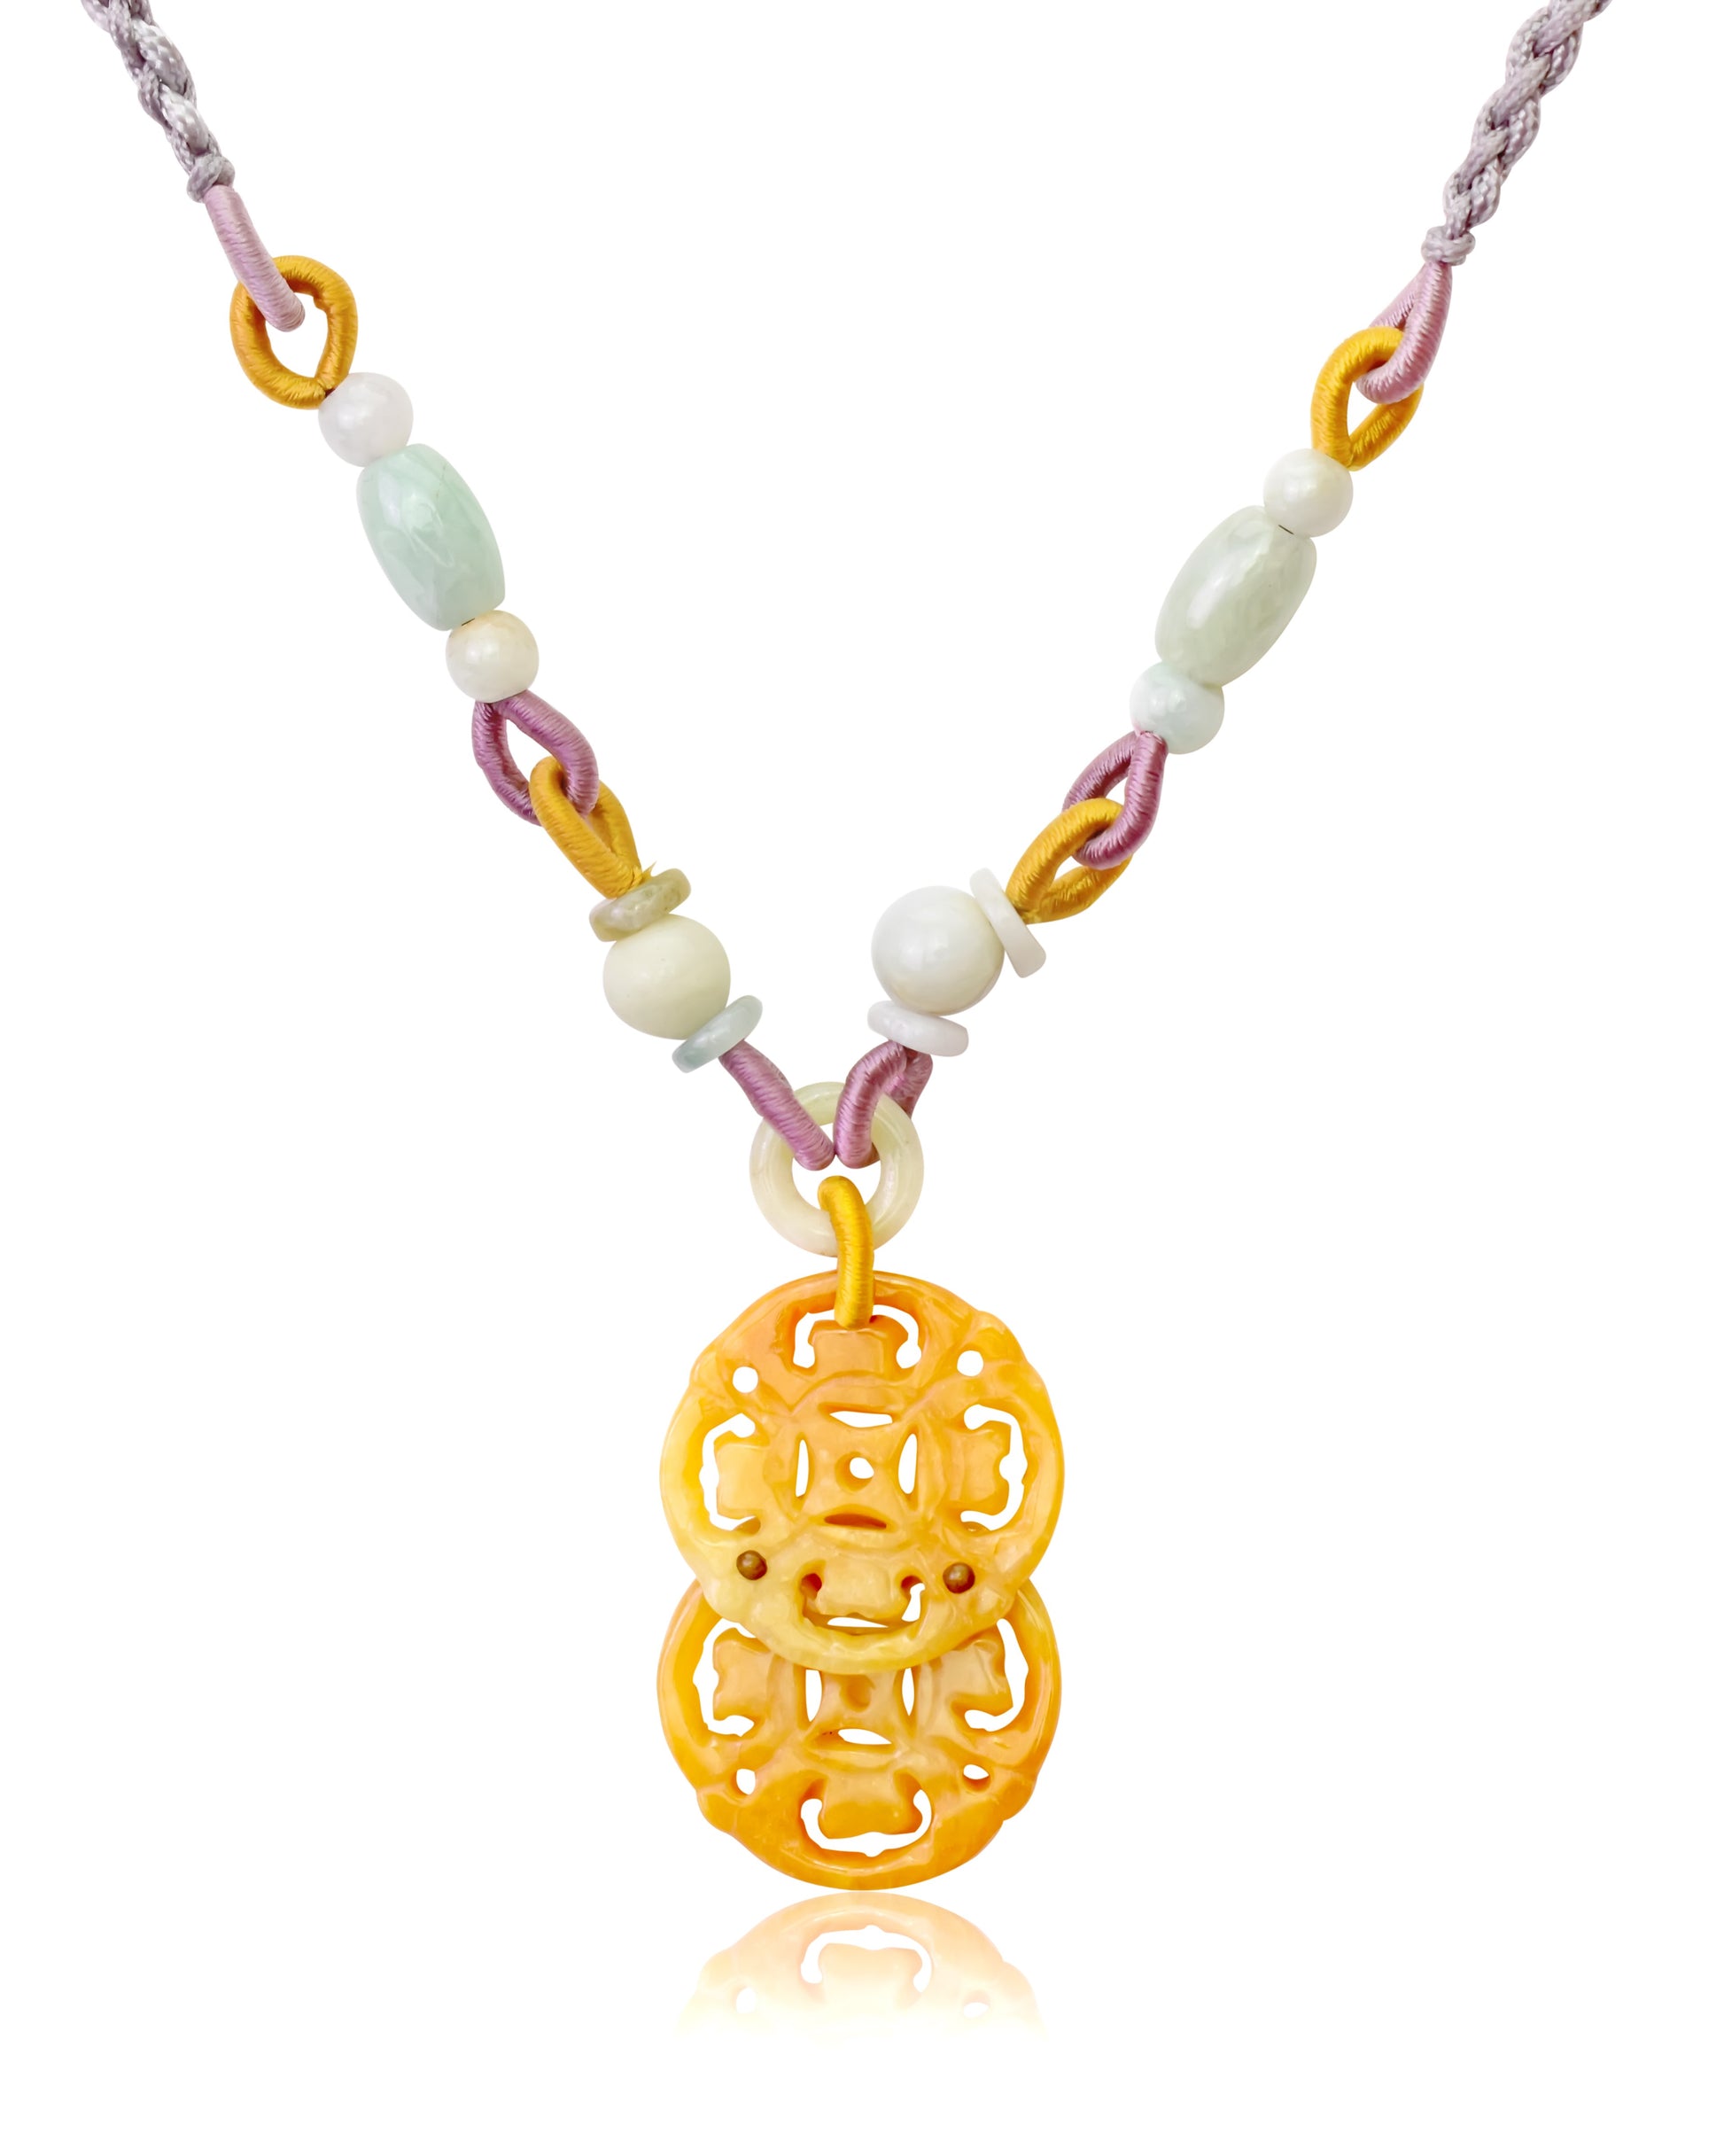 Get Rich Quick with Dynasty Double Gold Coin Jade Necklace